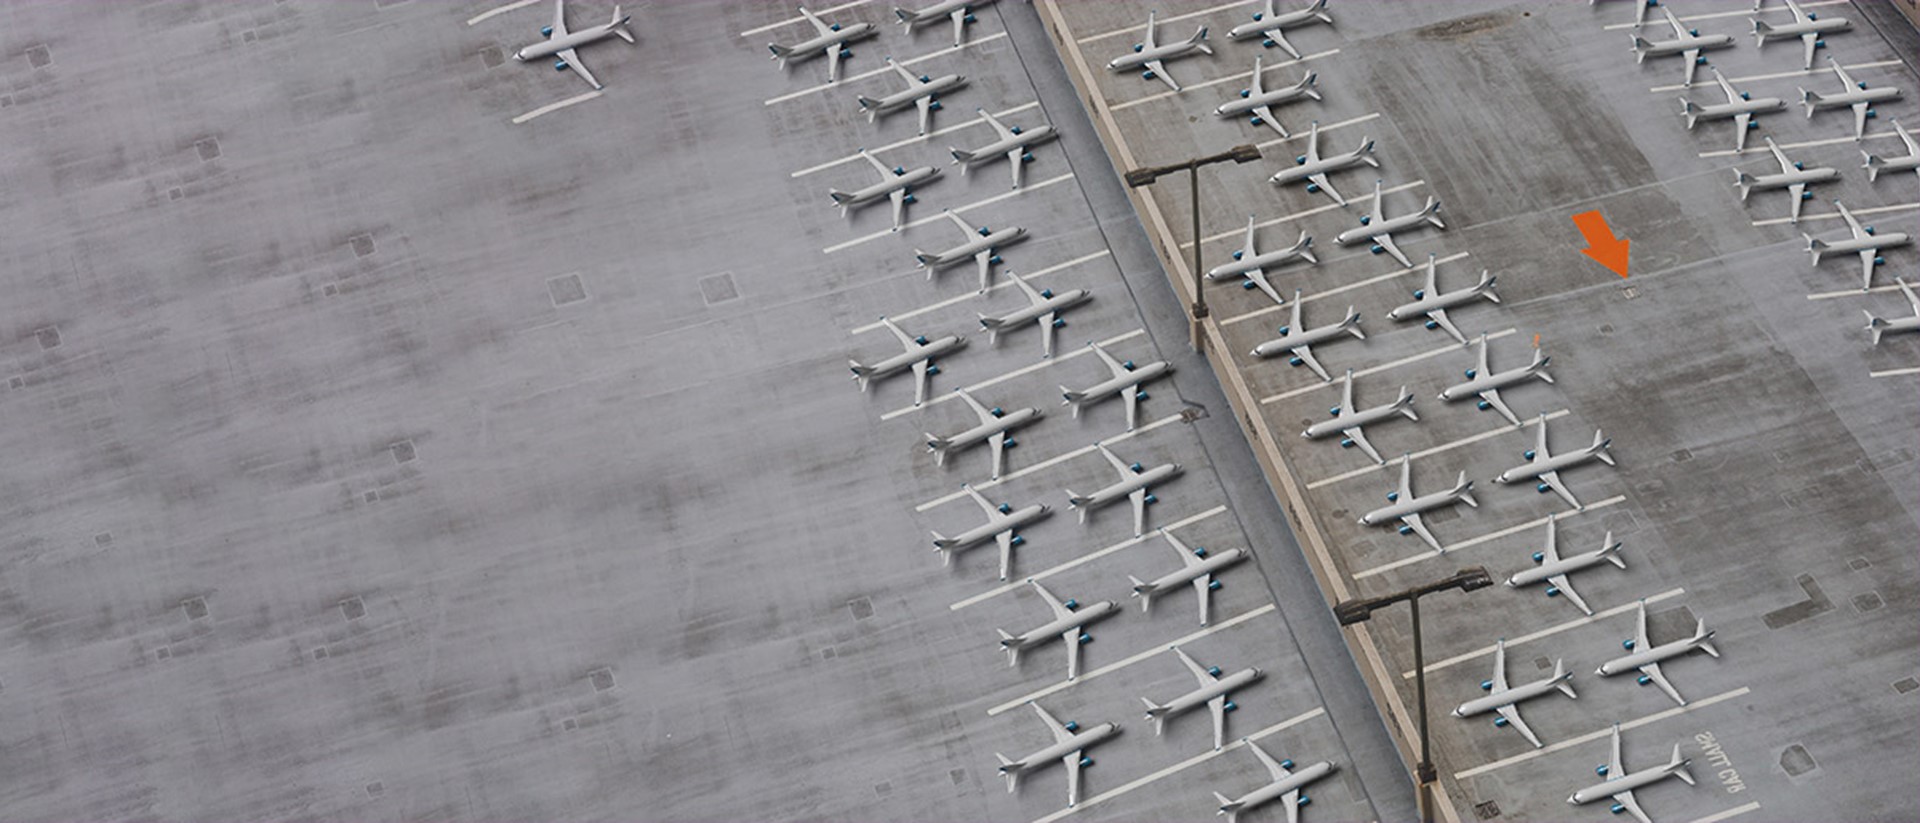 Image of airplanes parked with an orange arrow on the tarmac